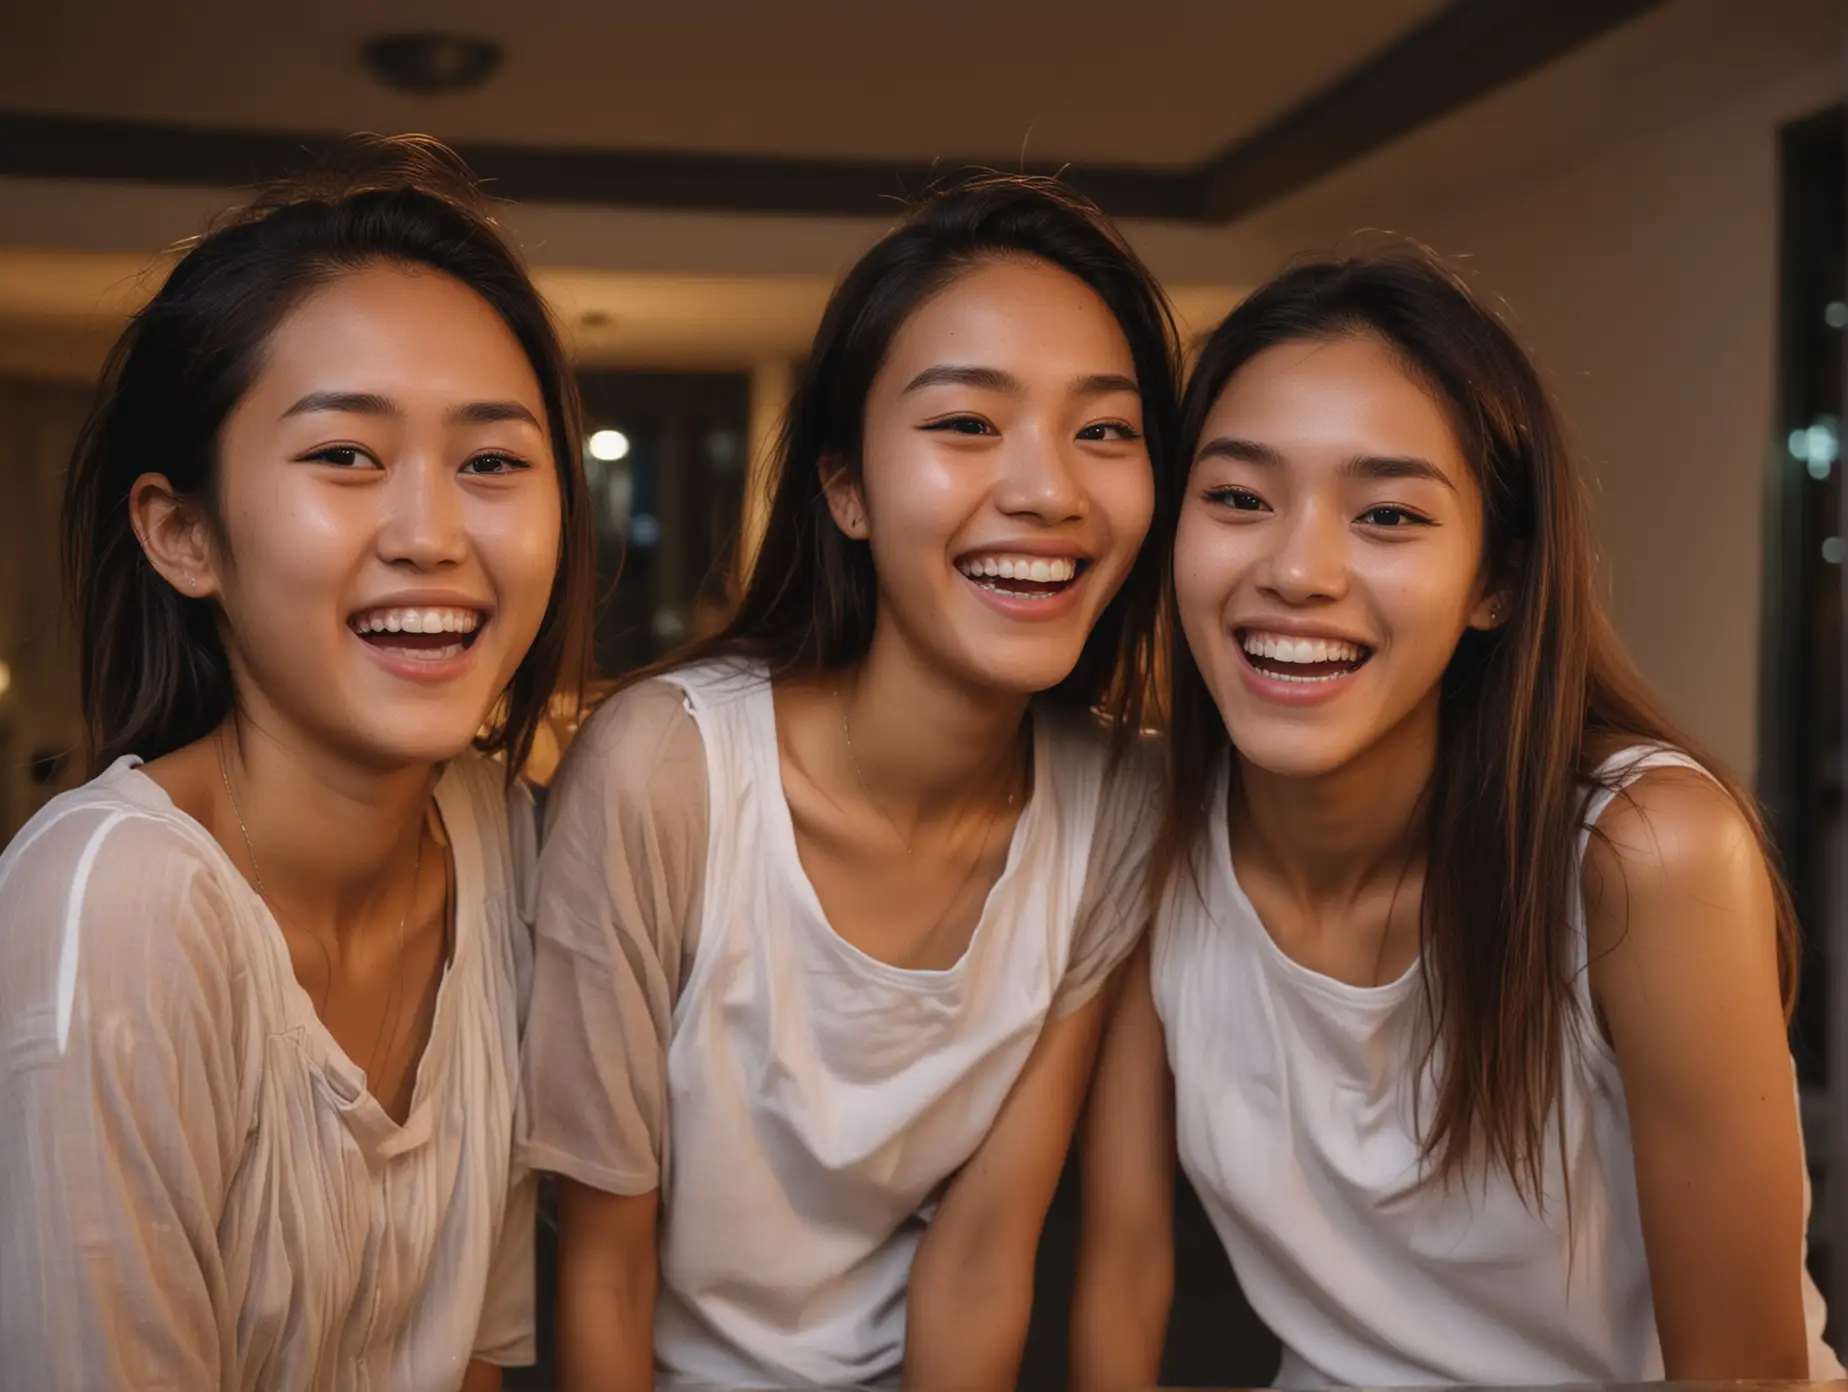 candid shot of faces of three beautiful skinny angelic college runners from indonesia at a party in a penthouse at dusk laughing hysterically together and overflowing with joy